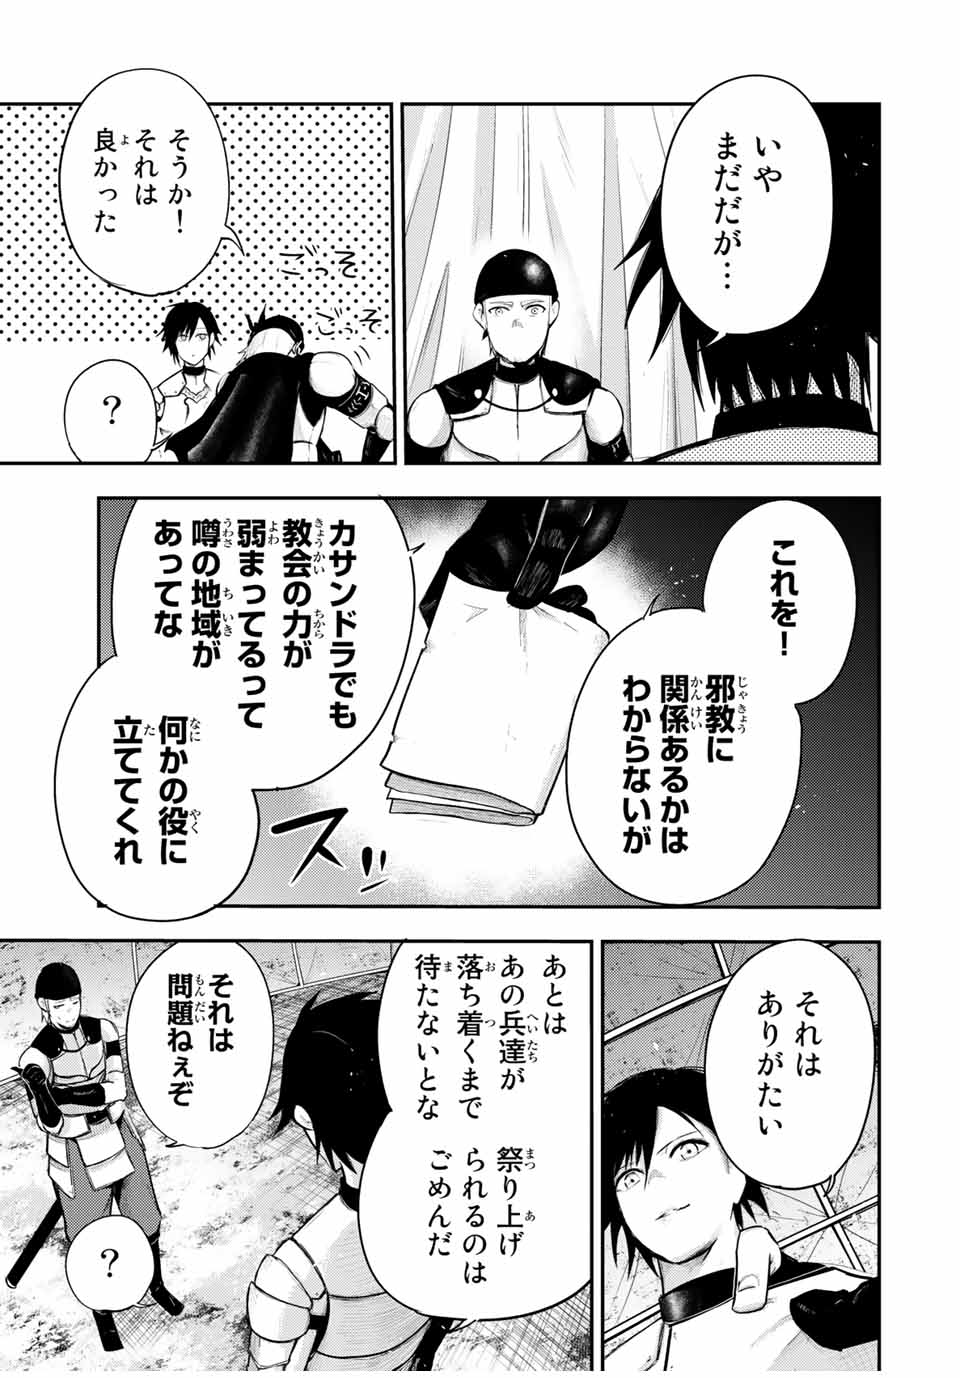 the strongest former prince-; 奴隷転生 ～その奴隷、最強の元王子につき～ 第32話 - Page 7